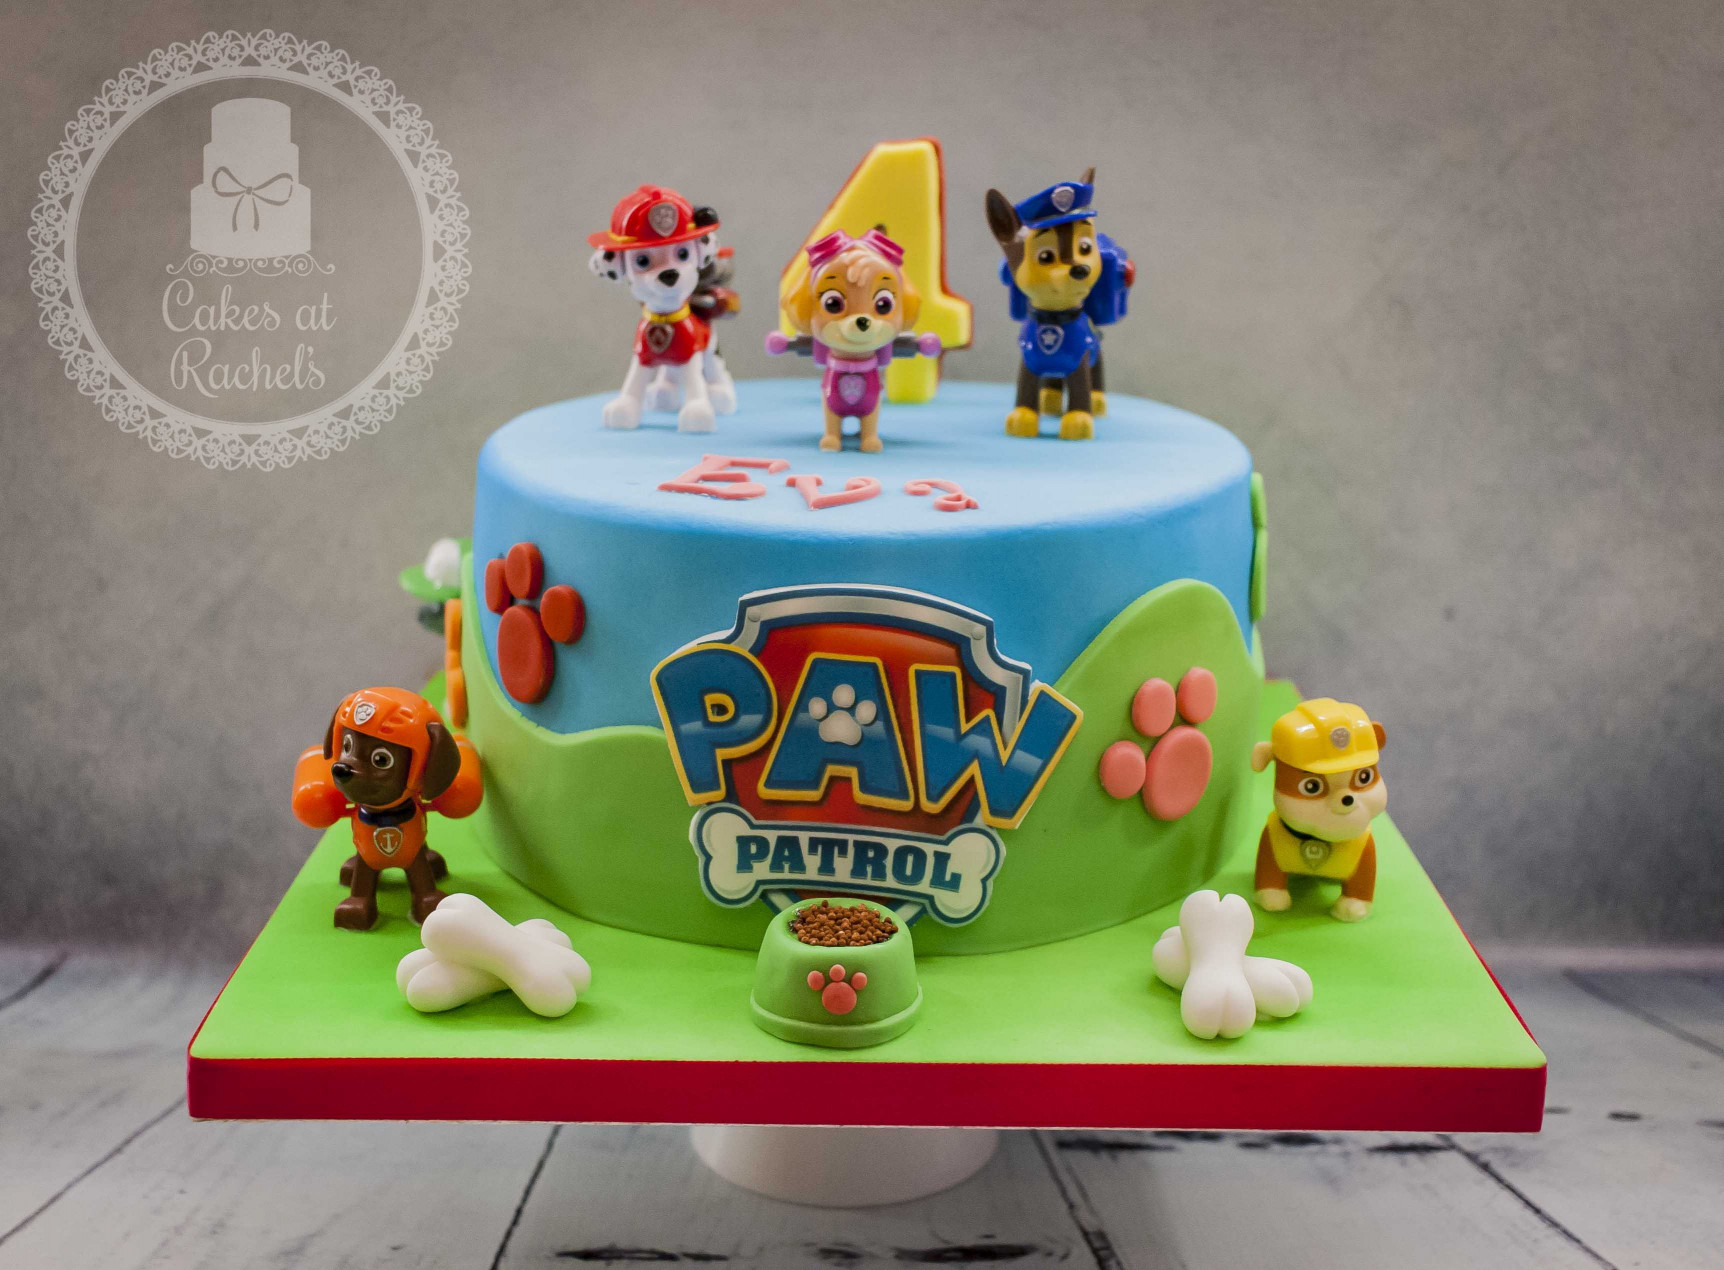 Paw Patrol Birthday Cake
 9 another all singing all dancing design but with